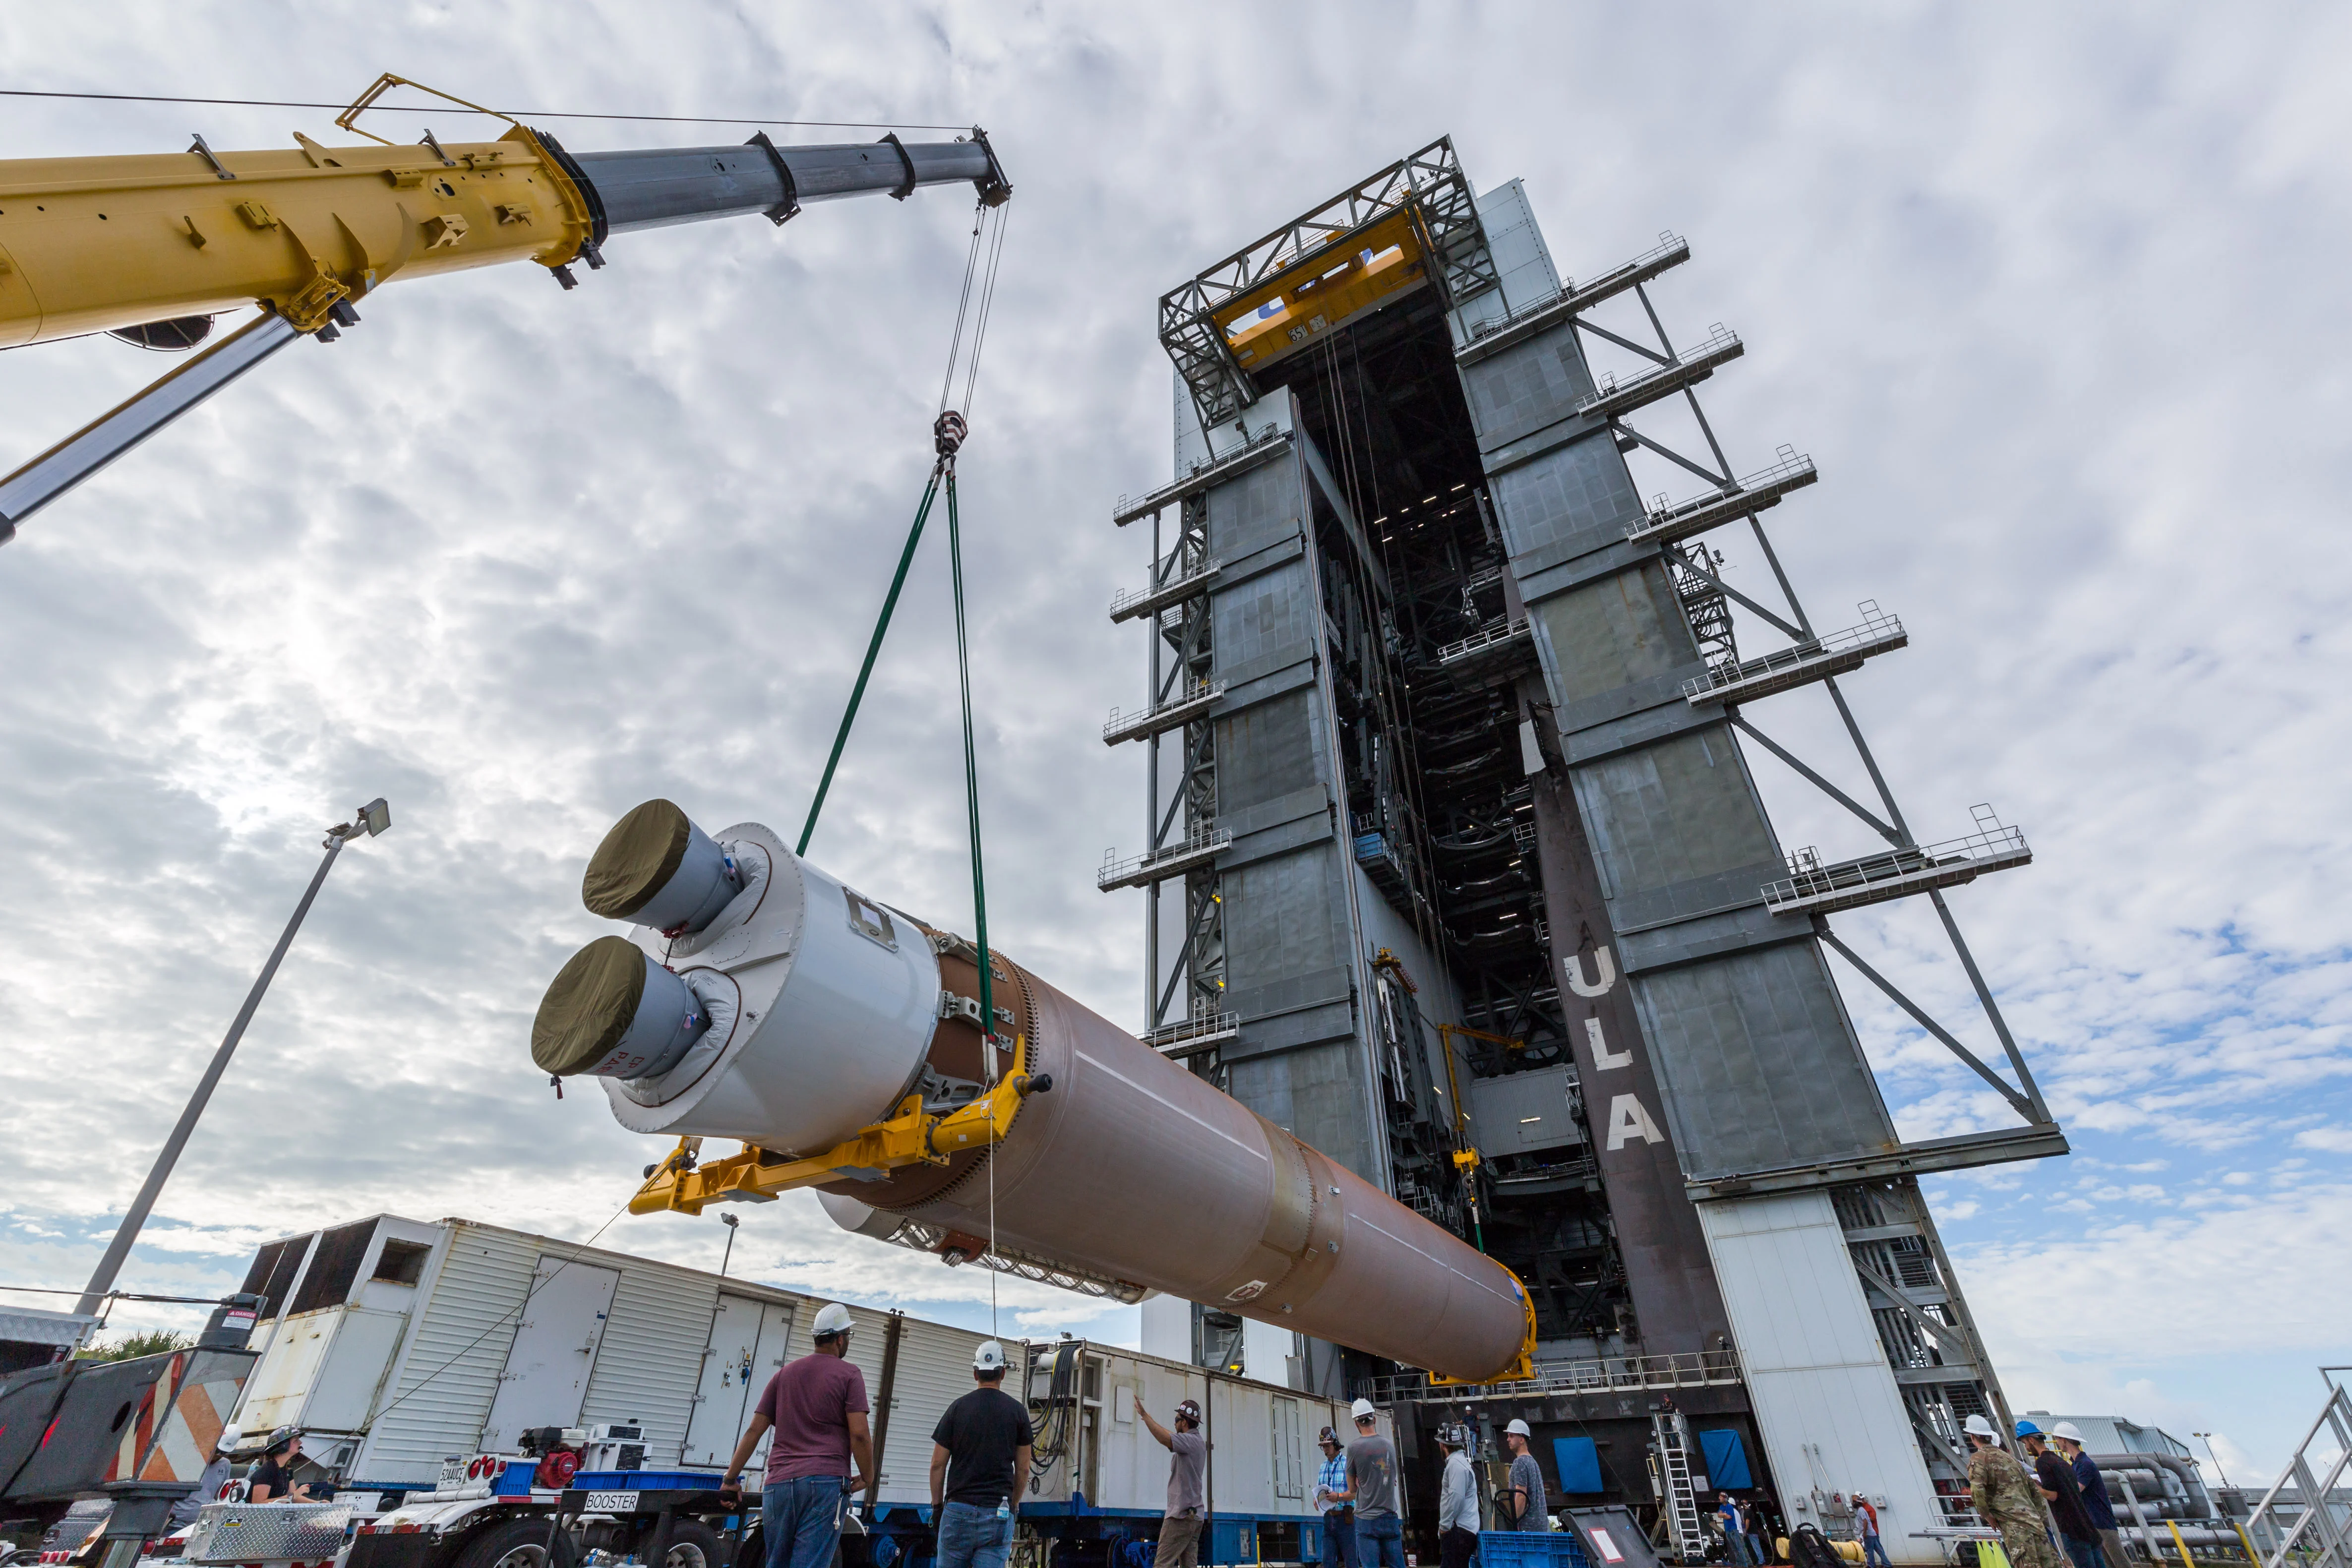 The Atlas V is lifted up by cranes to move the breakover fixture into position. Photo by United Launch Alliance